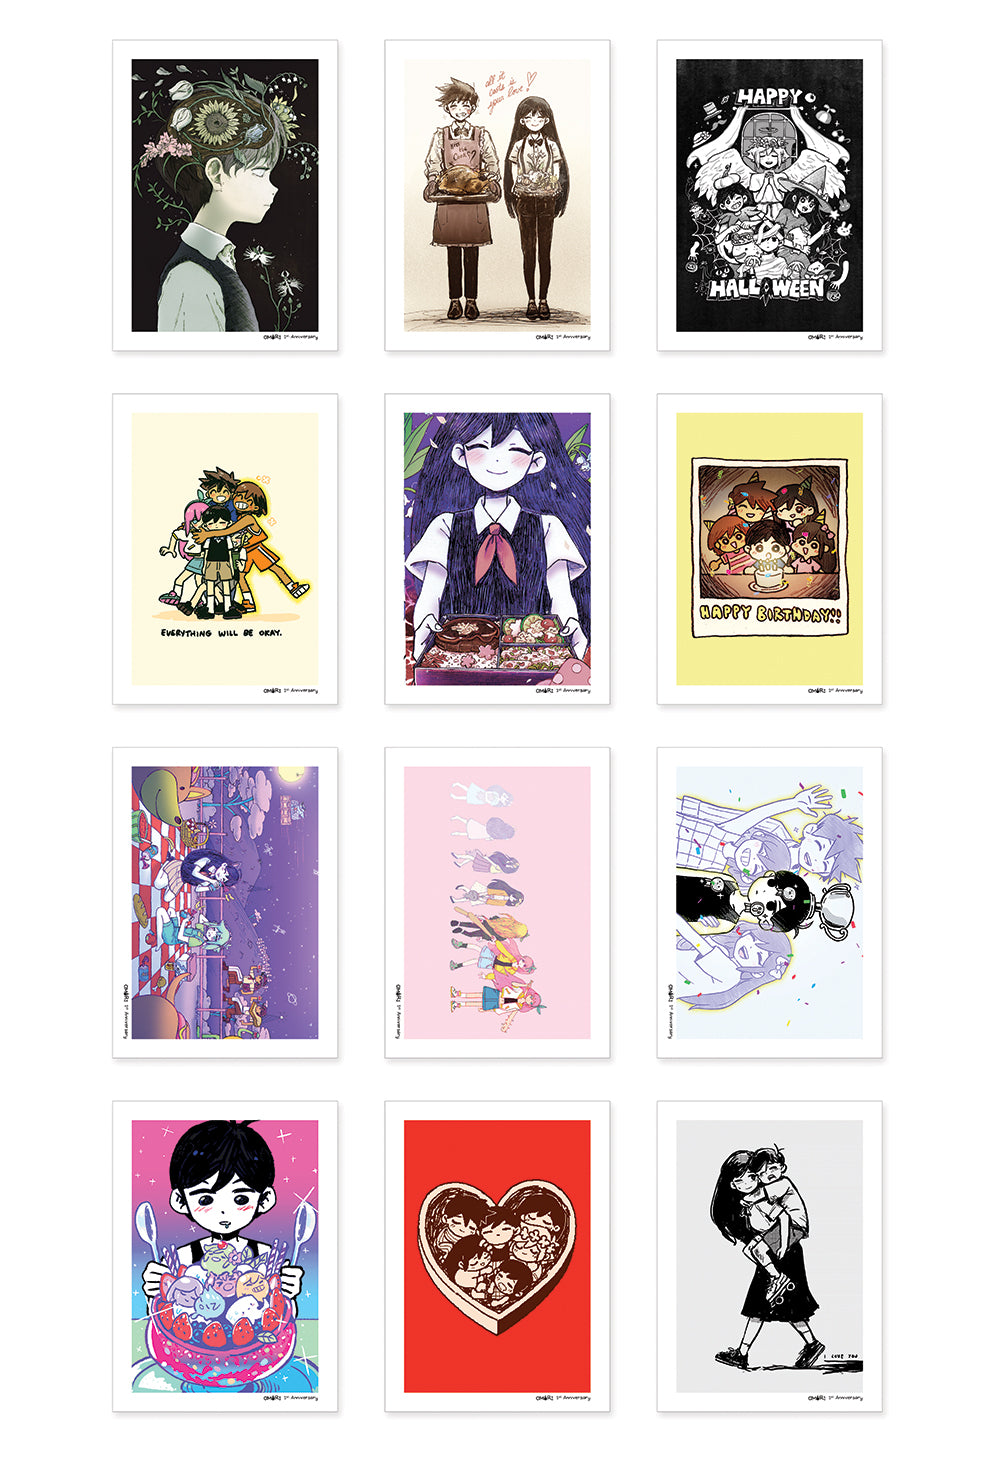 the OMORI 2nd Anniversary artwork is available as a limited edition giclée  print. thank you for another wonderful year.…